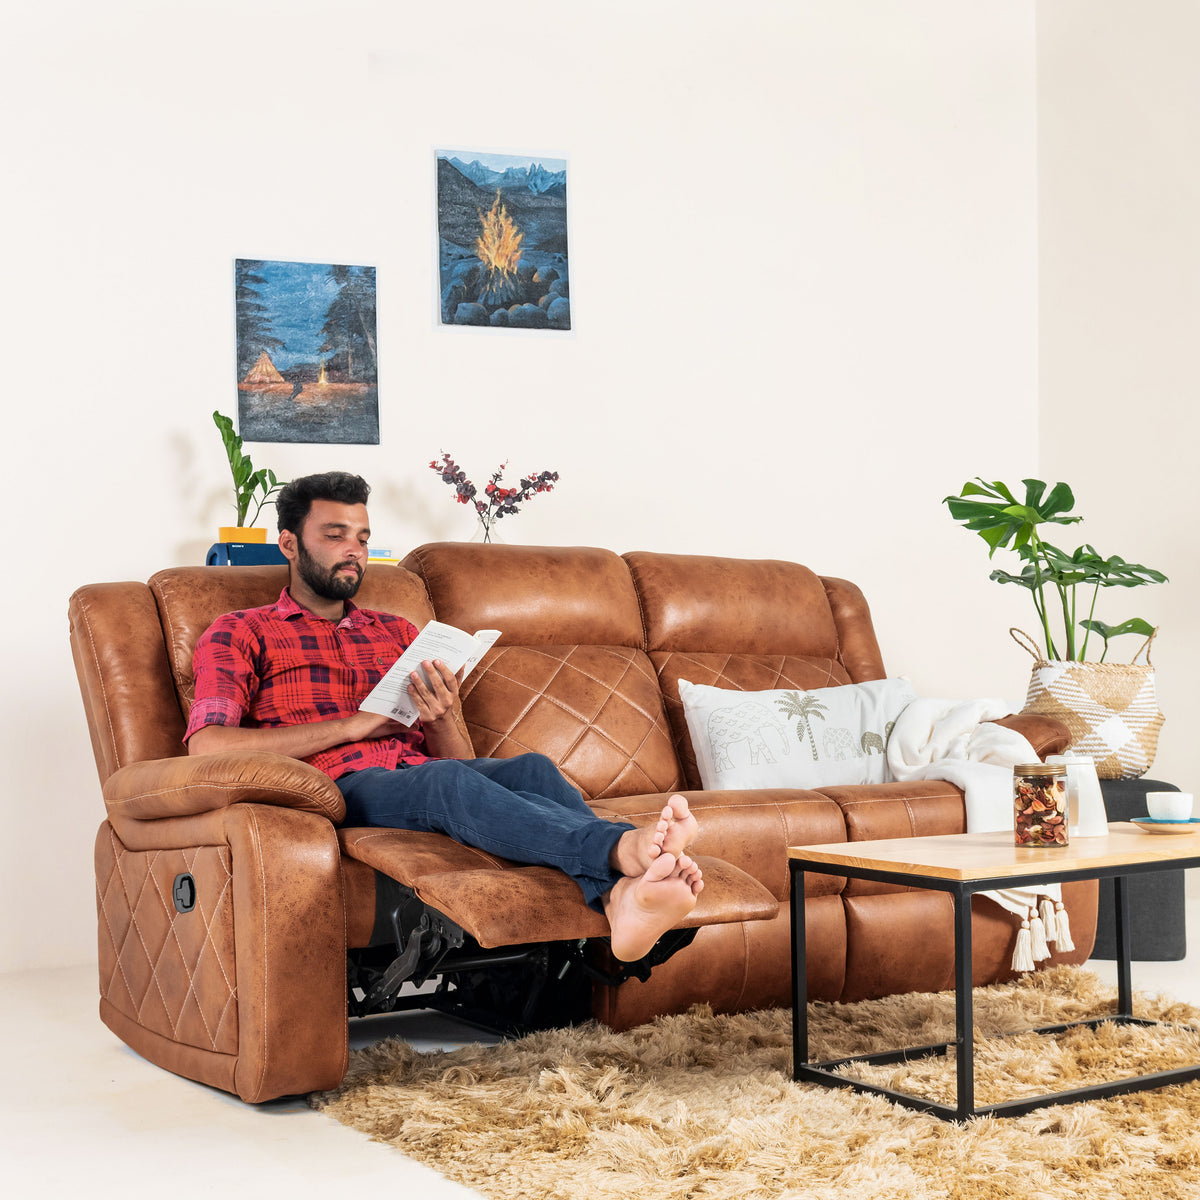 Marvin 3 Seater Recliner Sofa